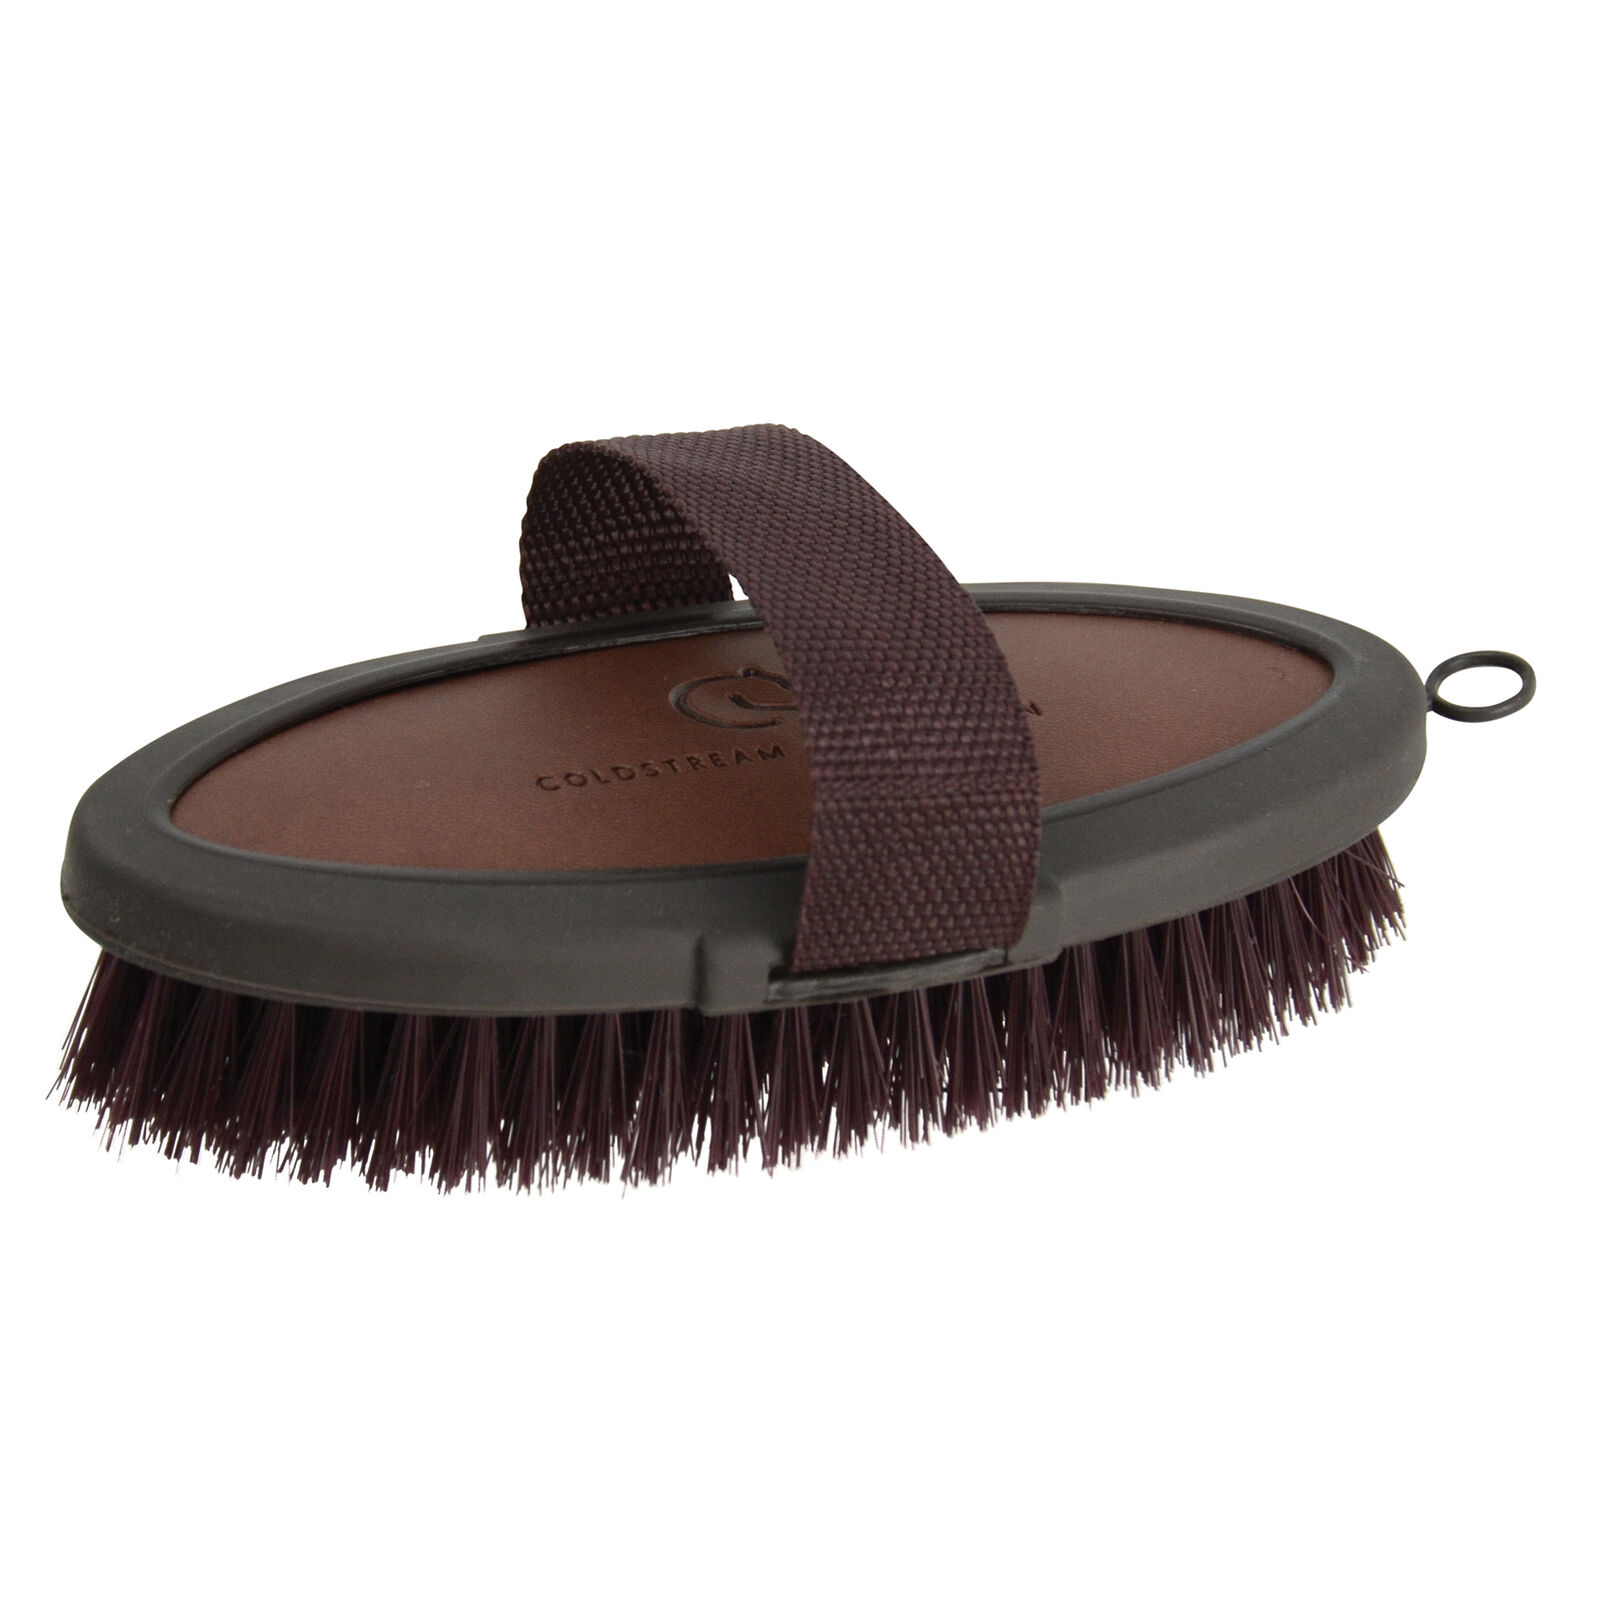 Coldstream Faux Leather Unisex Horse Care Body Brush - Brown Black One Size